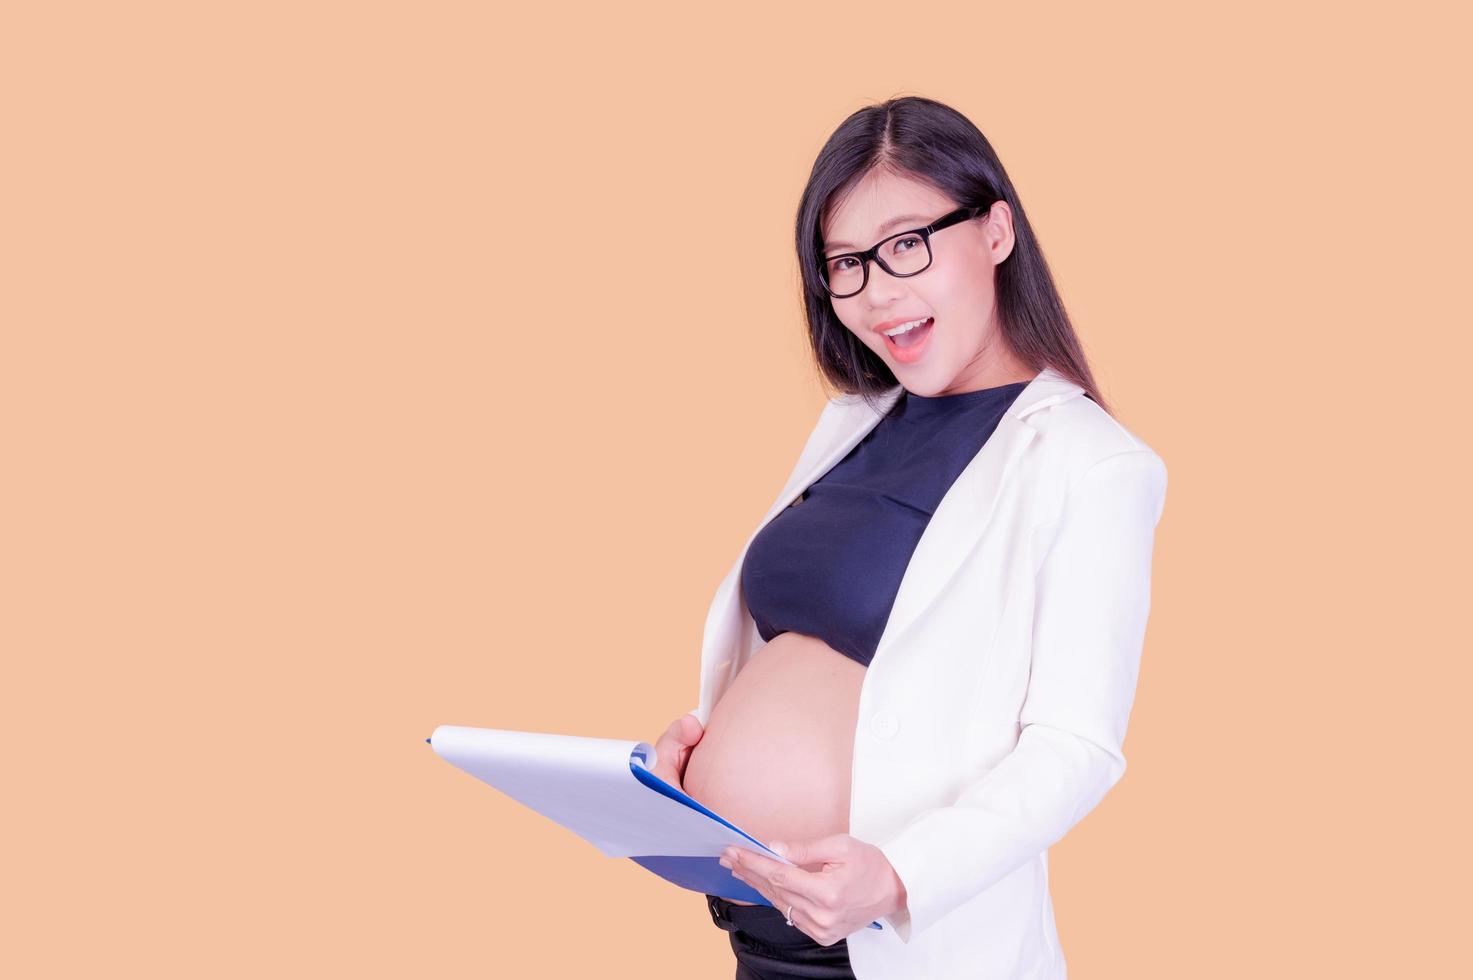 A beautiful pregnant Asian woman holding a paper binder, relaxing and enjoying her work photo